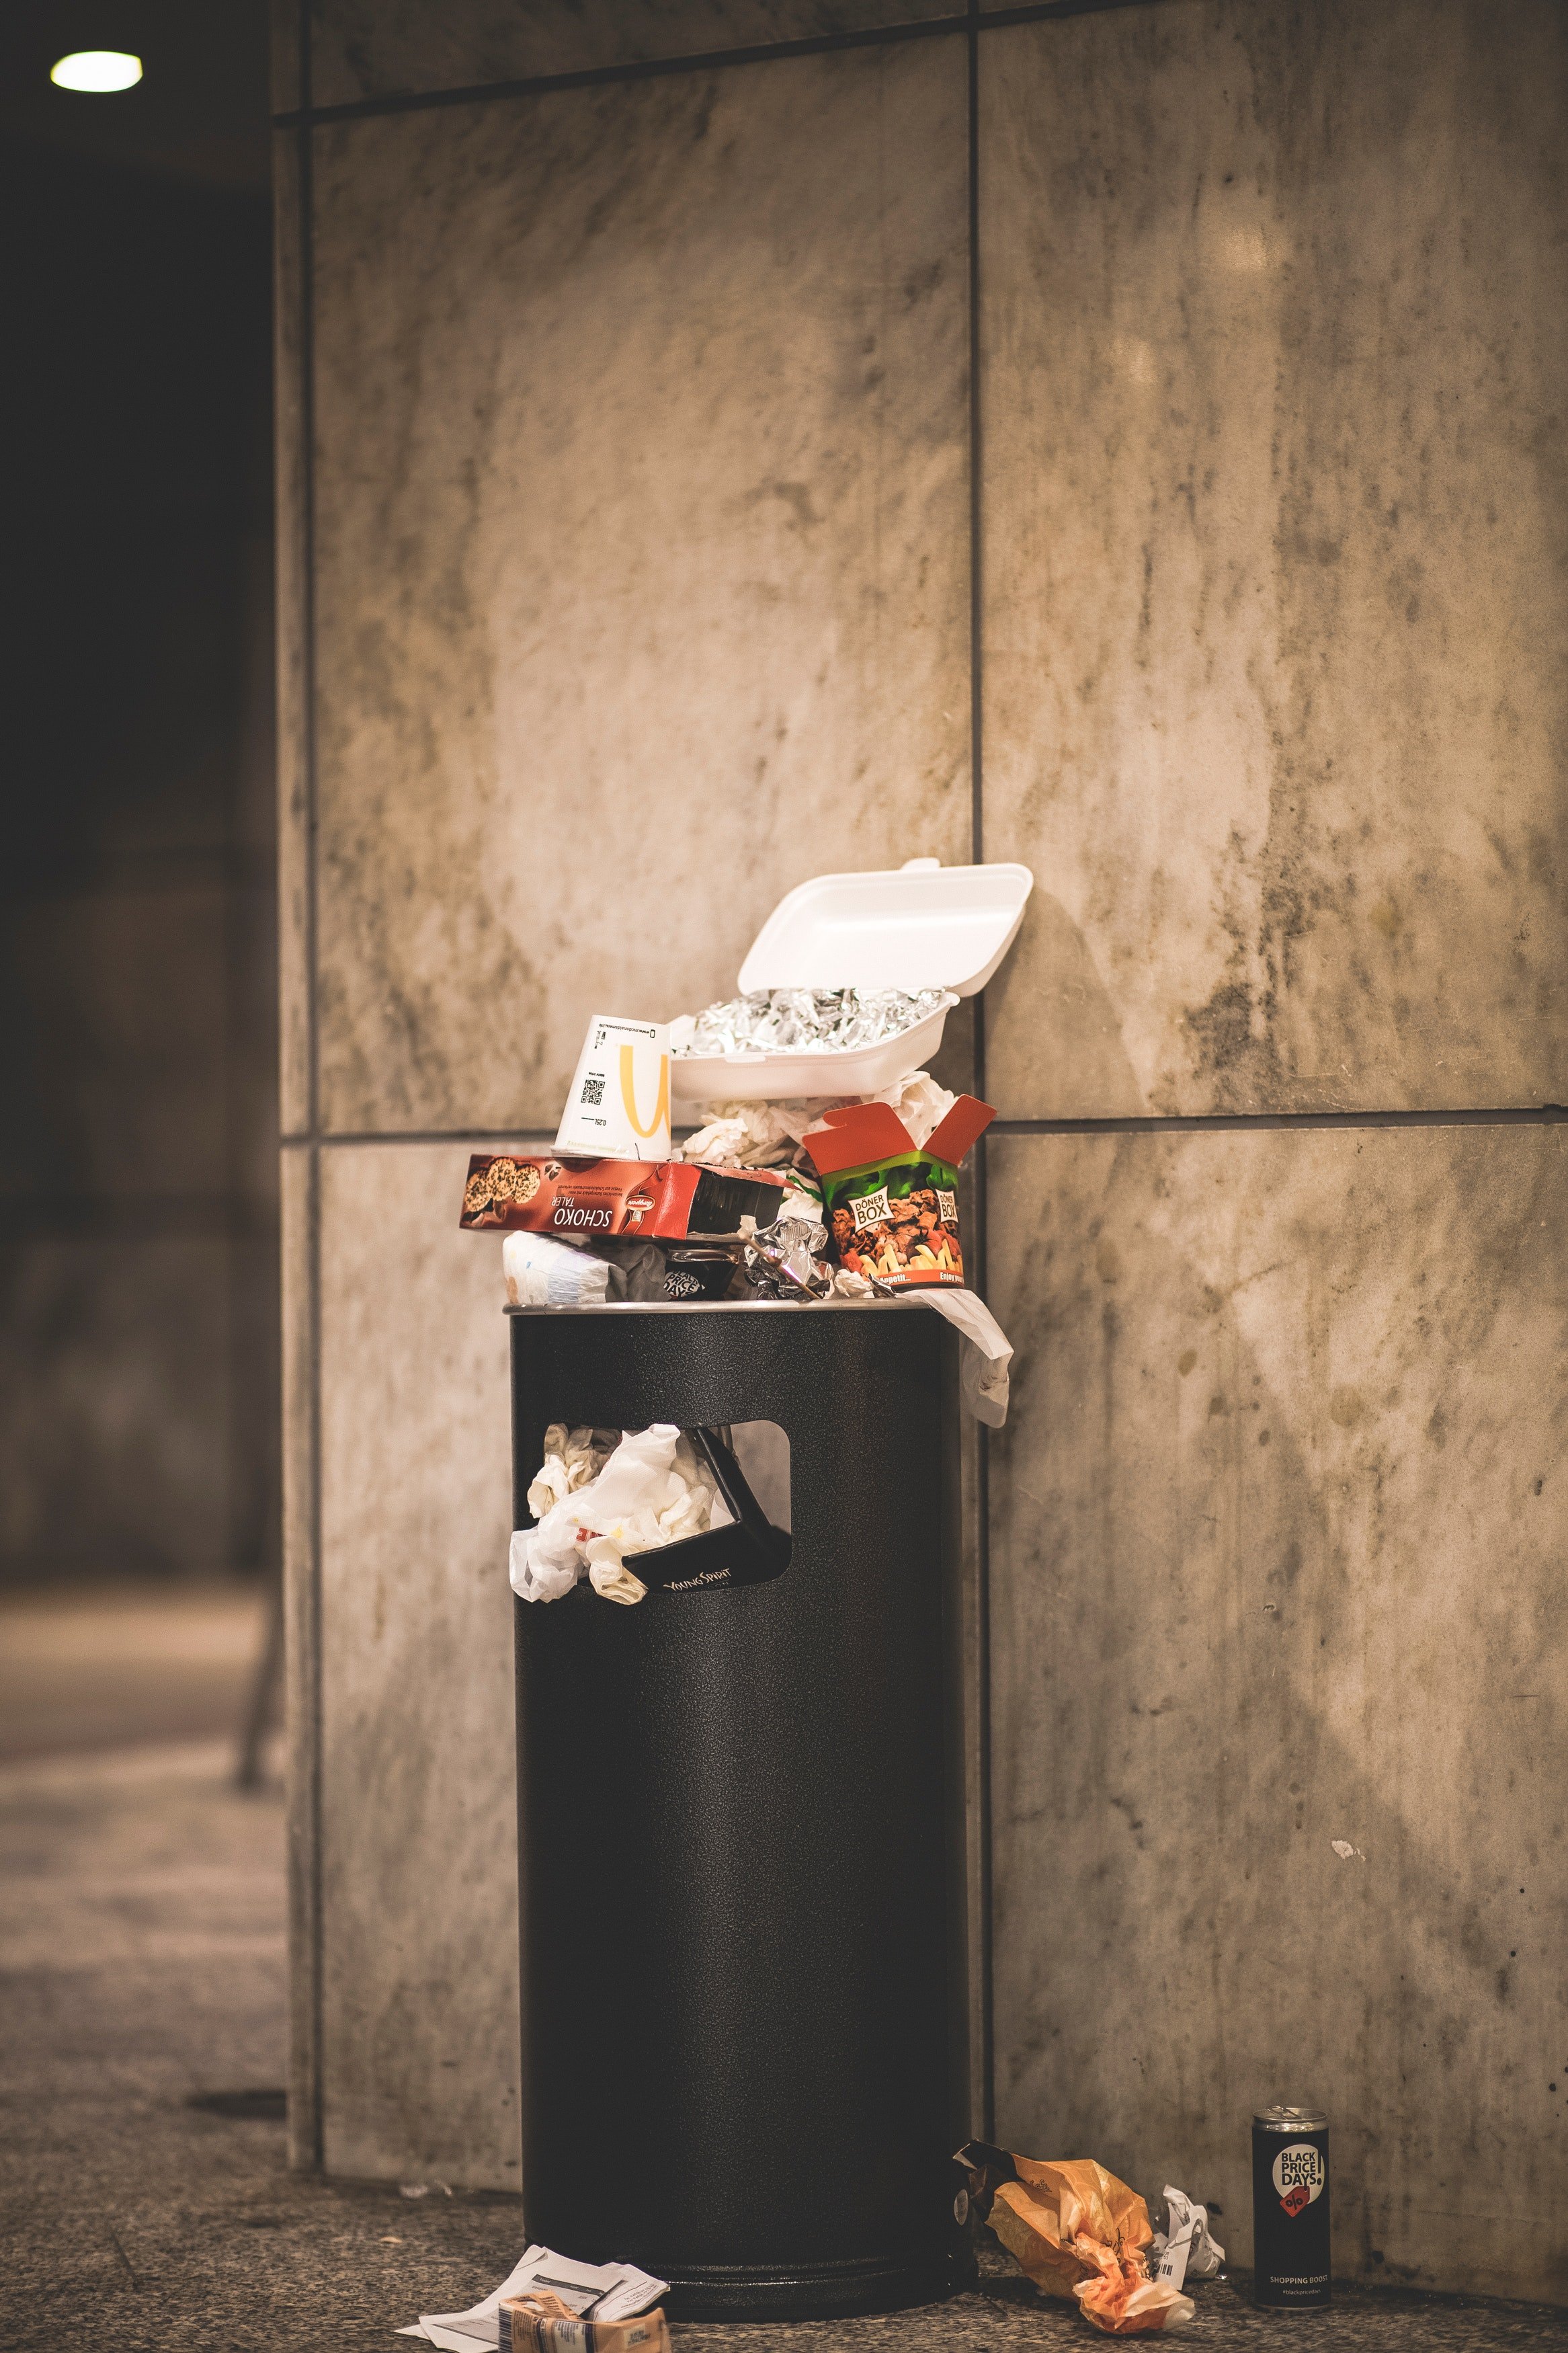 Linda saw Betty looking through the trash and was surprised to see her eat leftovers. | Source: Pexels